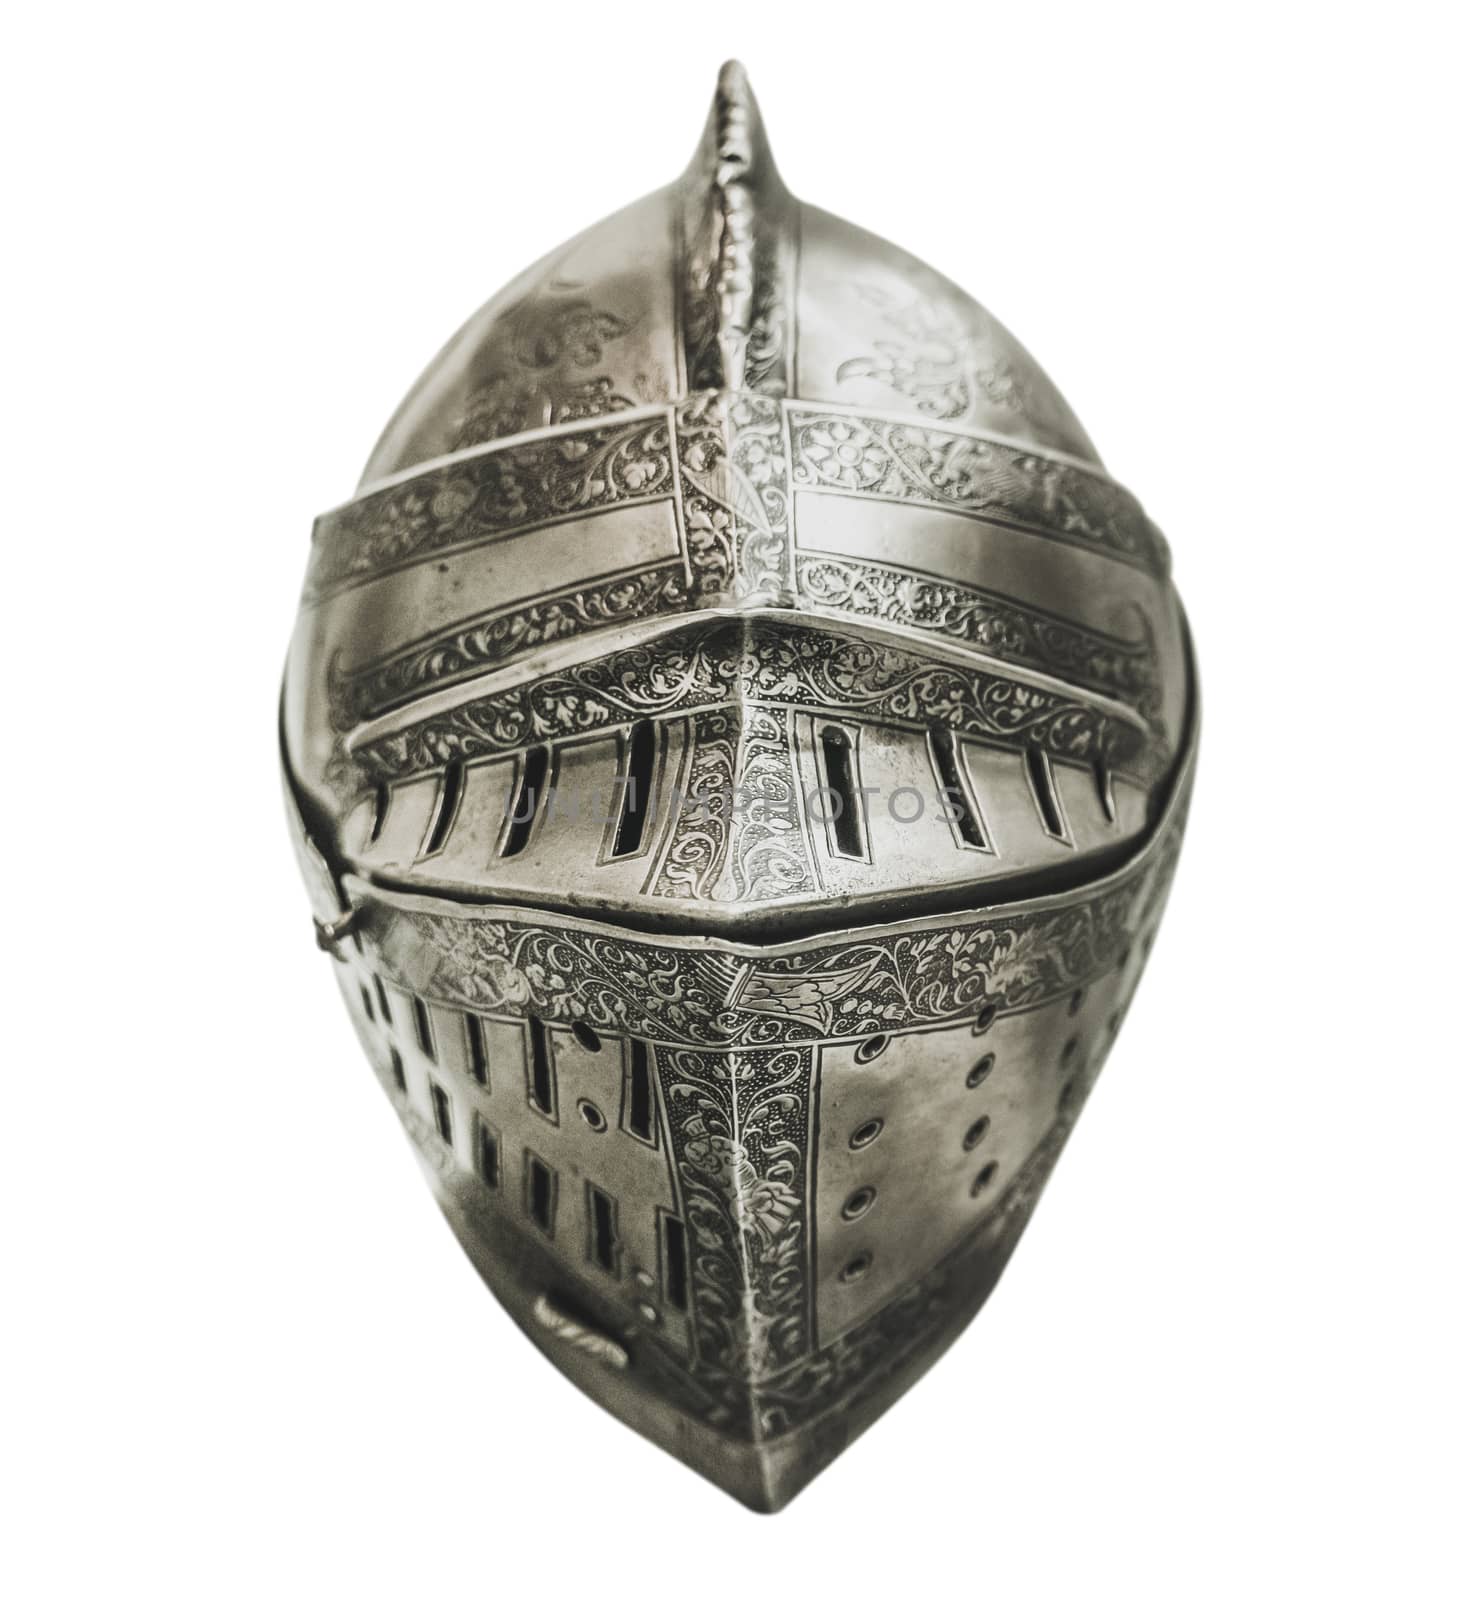 Isolated Authentic Knight's Armour Helmet With Shallow Depth of Focus And A White Background